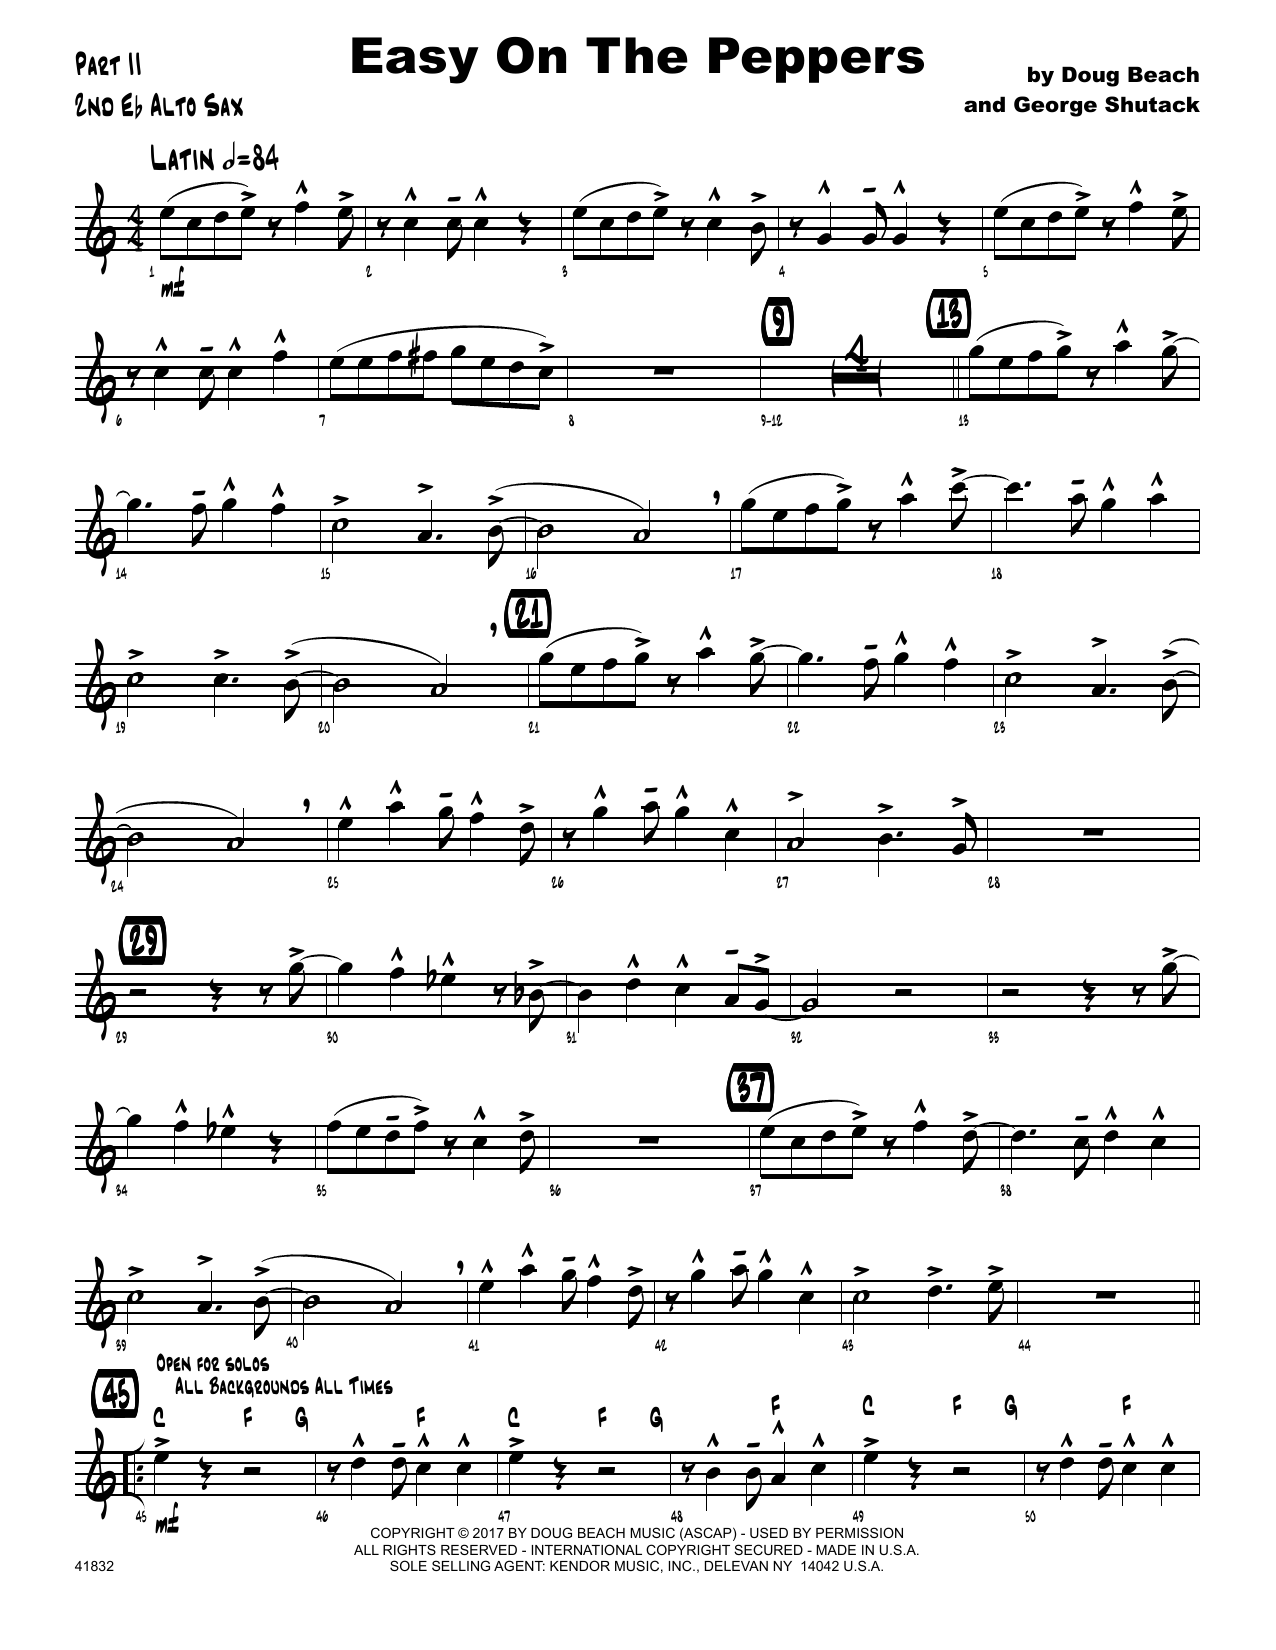 Download Doug Beach & George Shutack Easy On The Peppers - 2nd Eb Alto Saxop Sheet Music